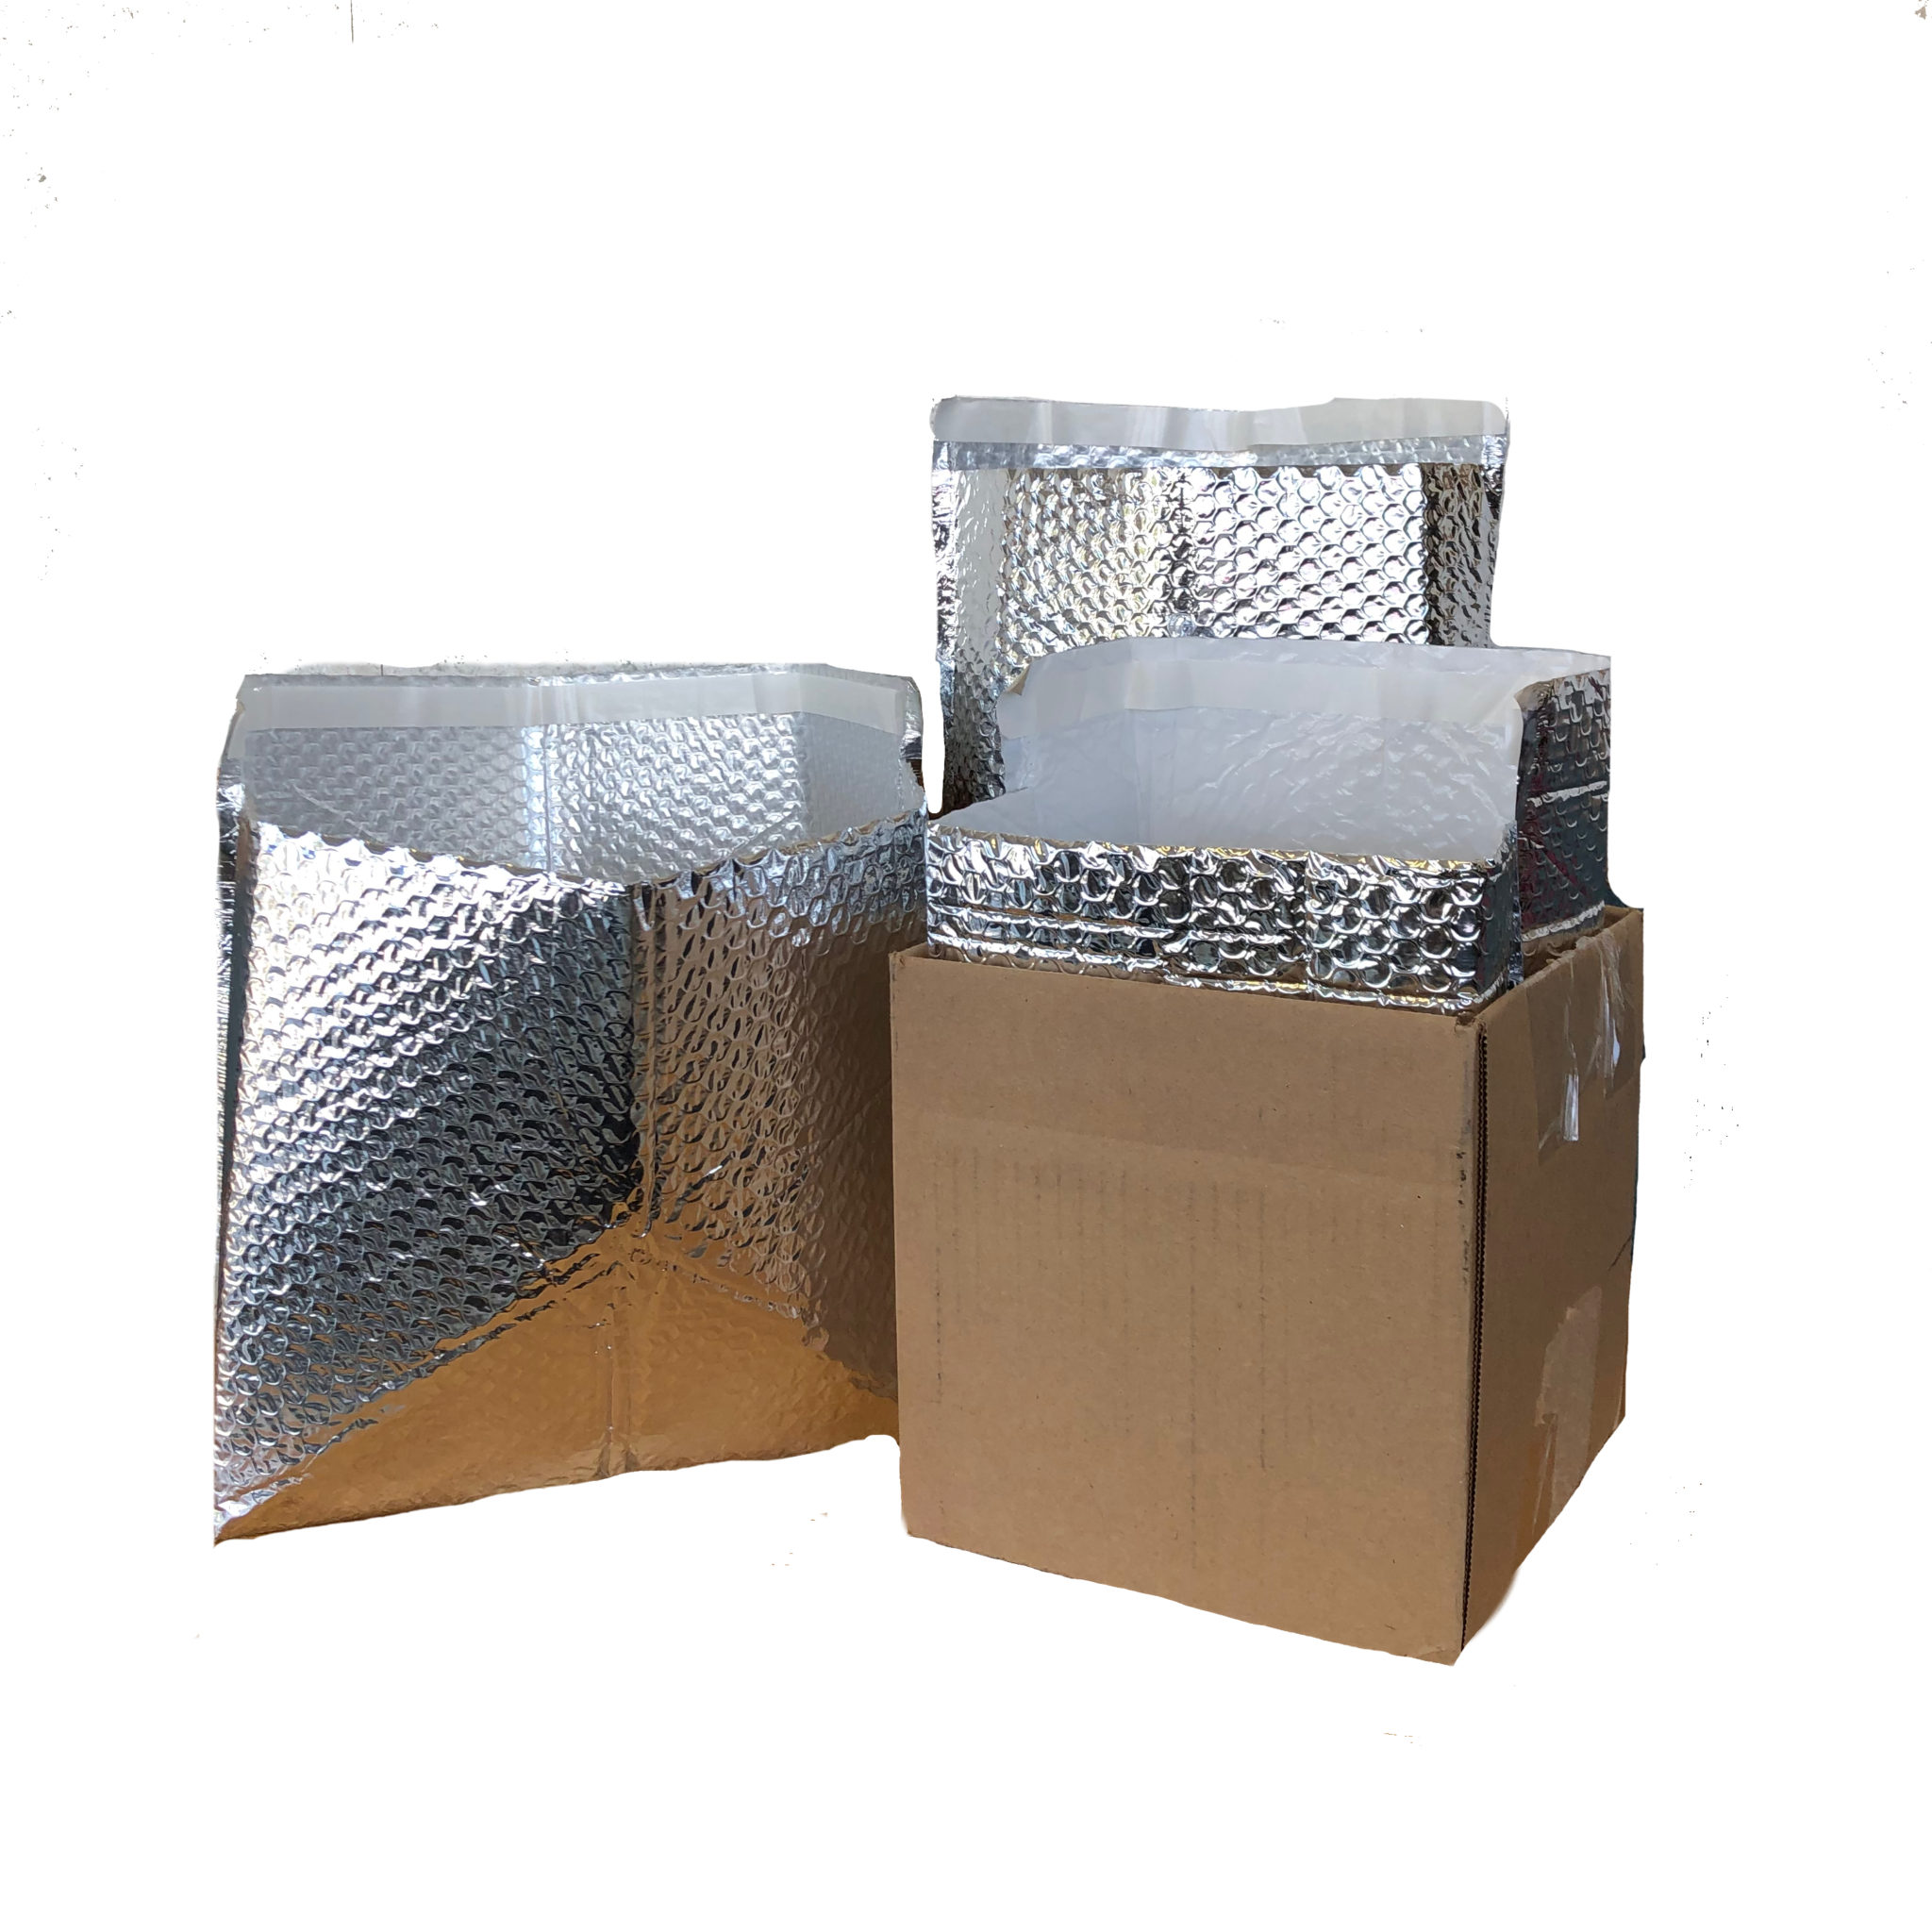 InsulTote Insulated Box Liners